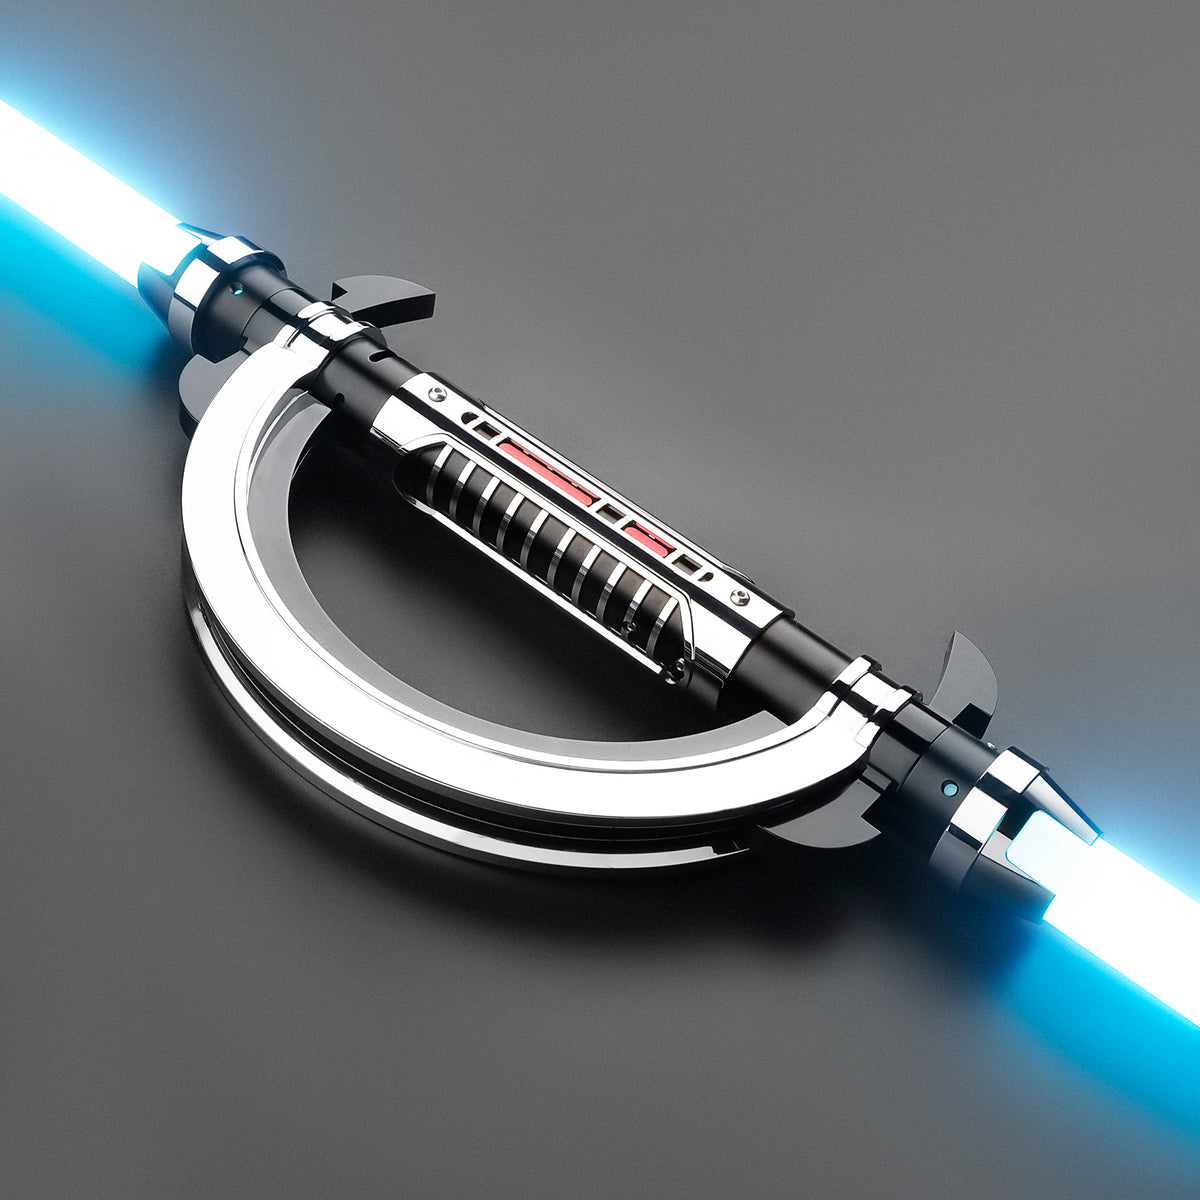 SaberCustom Inquisitor Xenopixel v3 Lightsaber Collection and Display Force Light Saber Infinite Colors Changing NO074